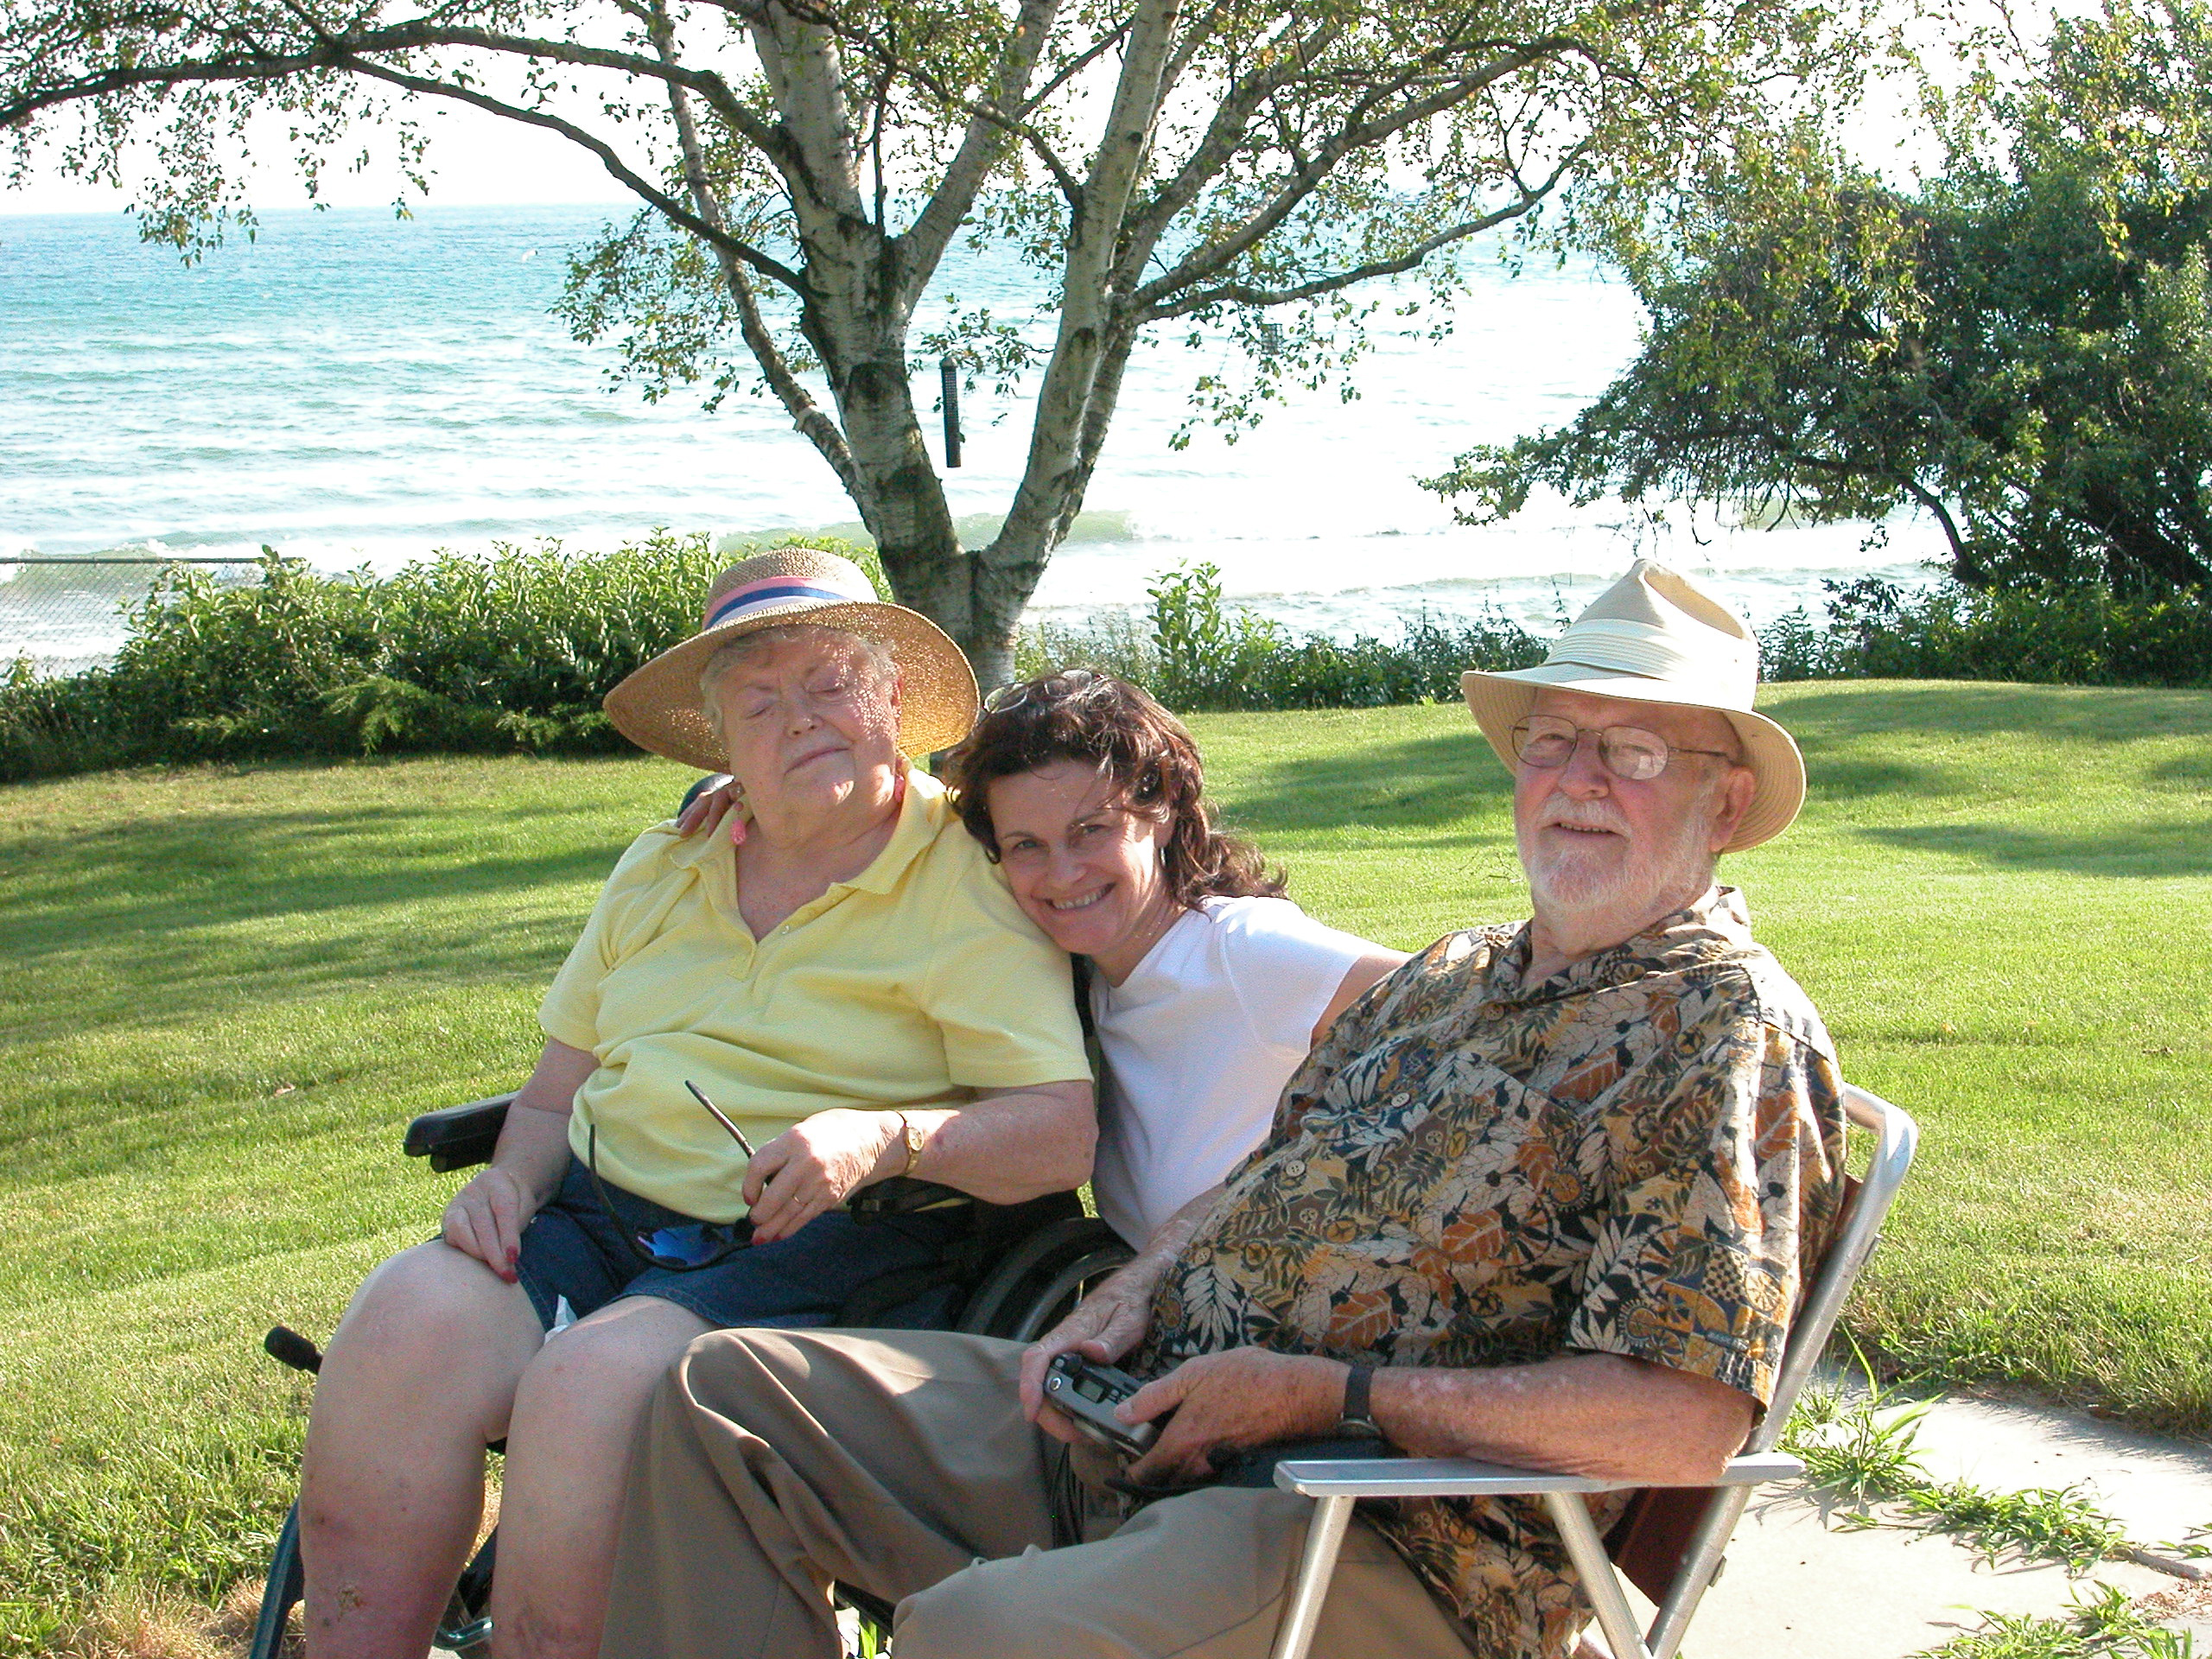 Caroline sitting on a bench with her mother and father